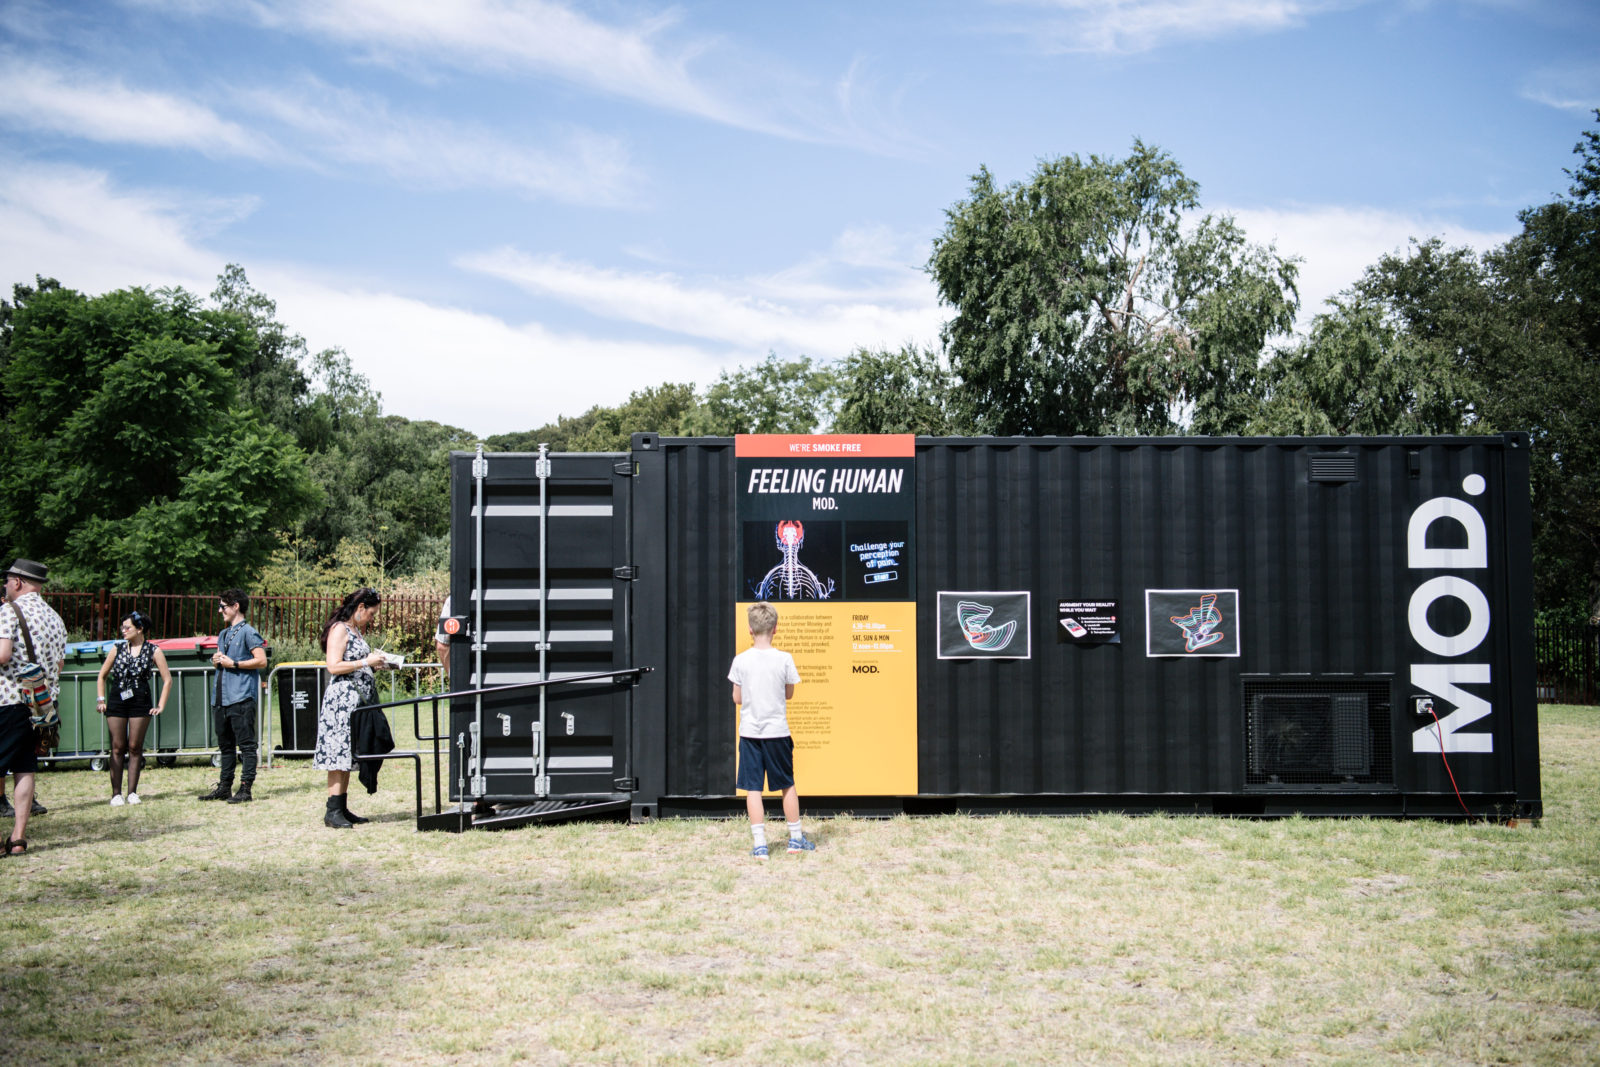 A black shipping container sits on grass. There is a queue of people waiting to get inside. The container is labelled MOD. and has information about the exhibit.